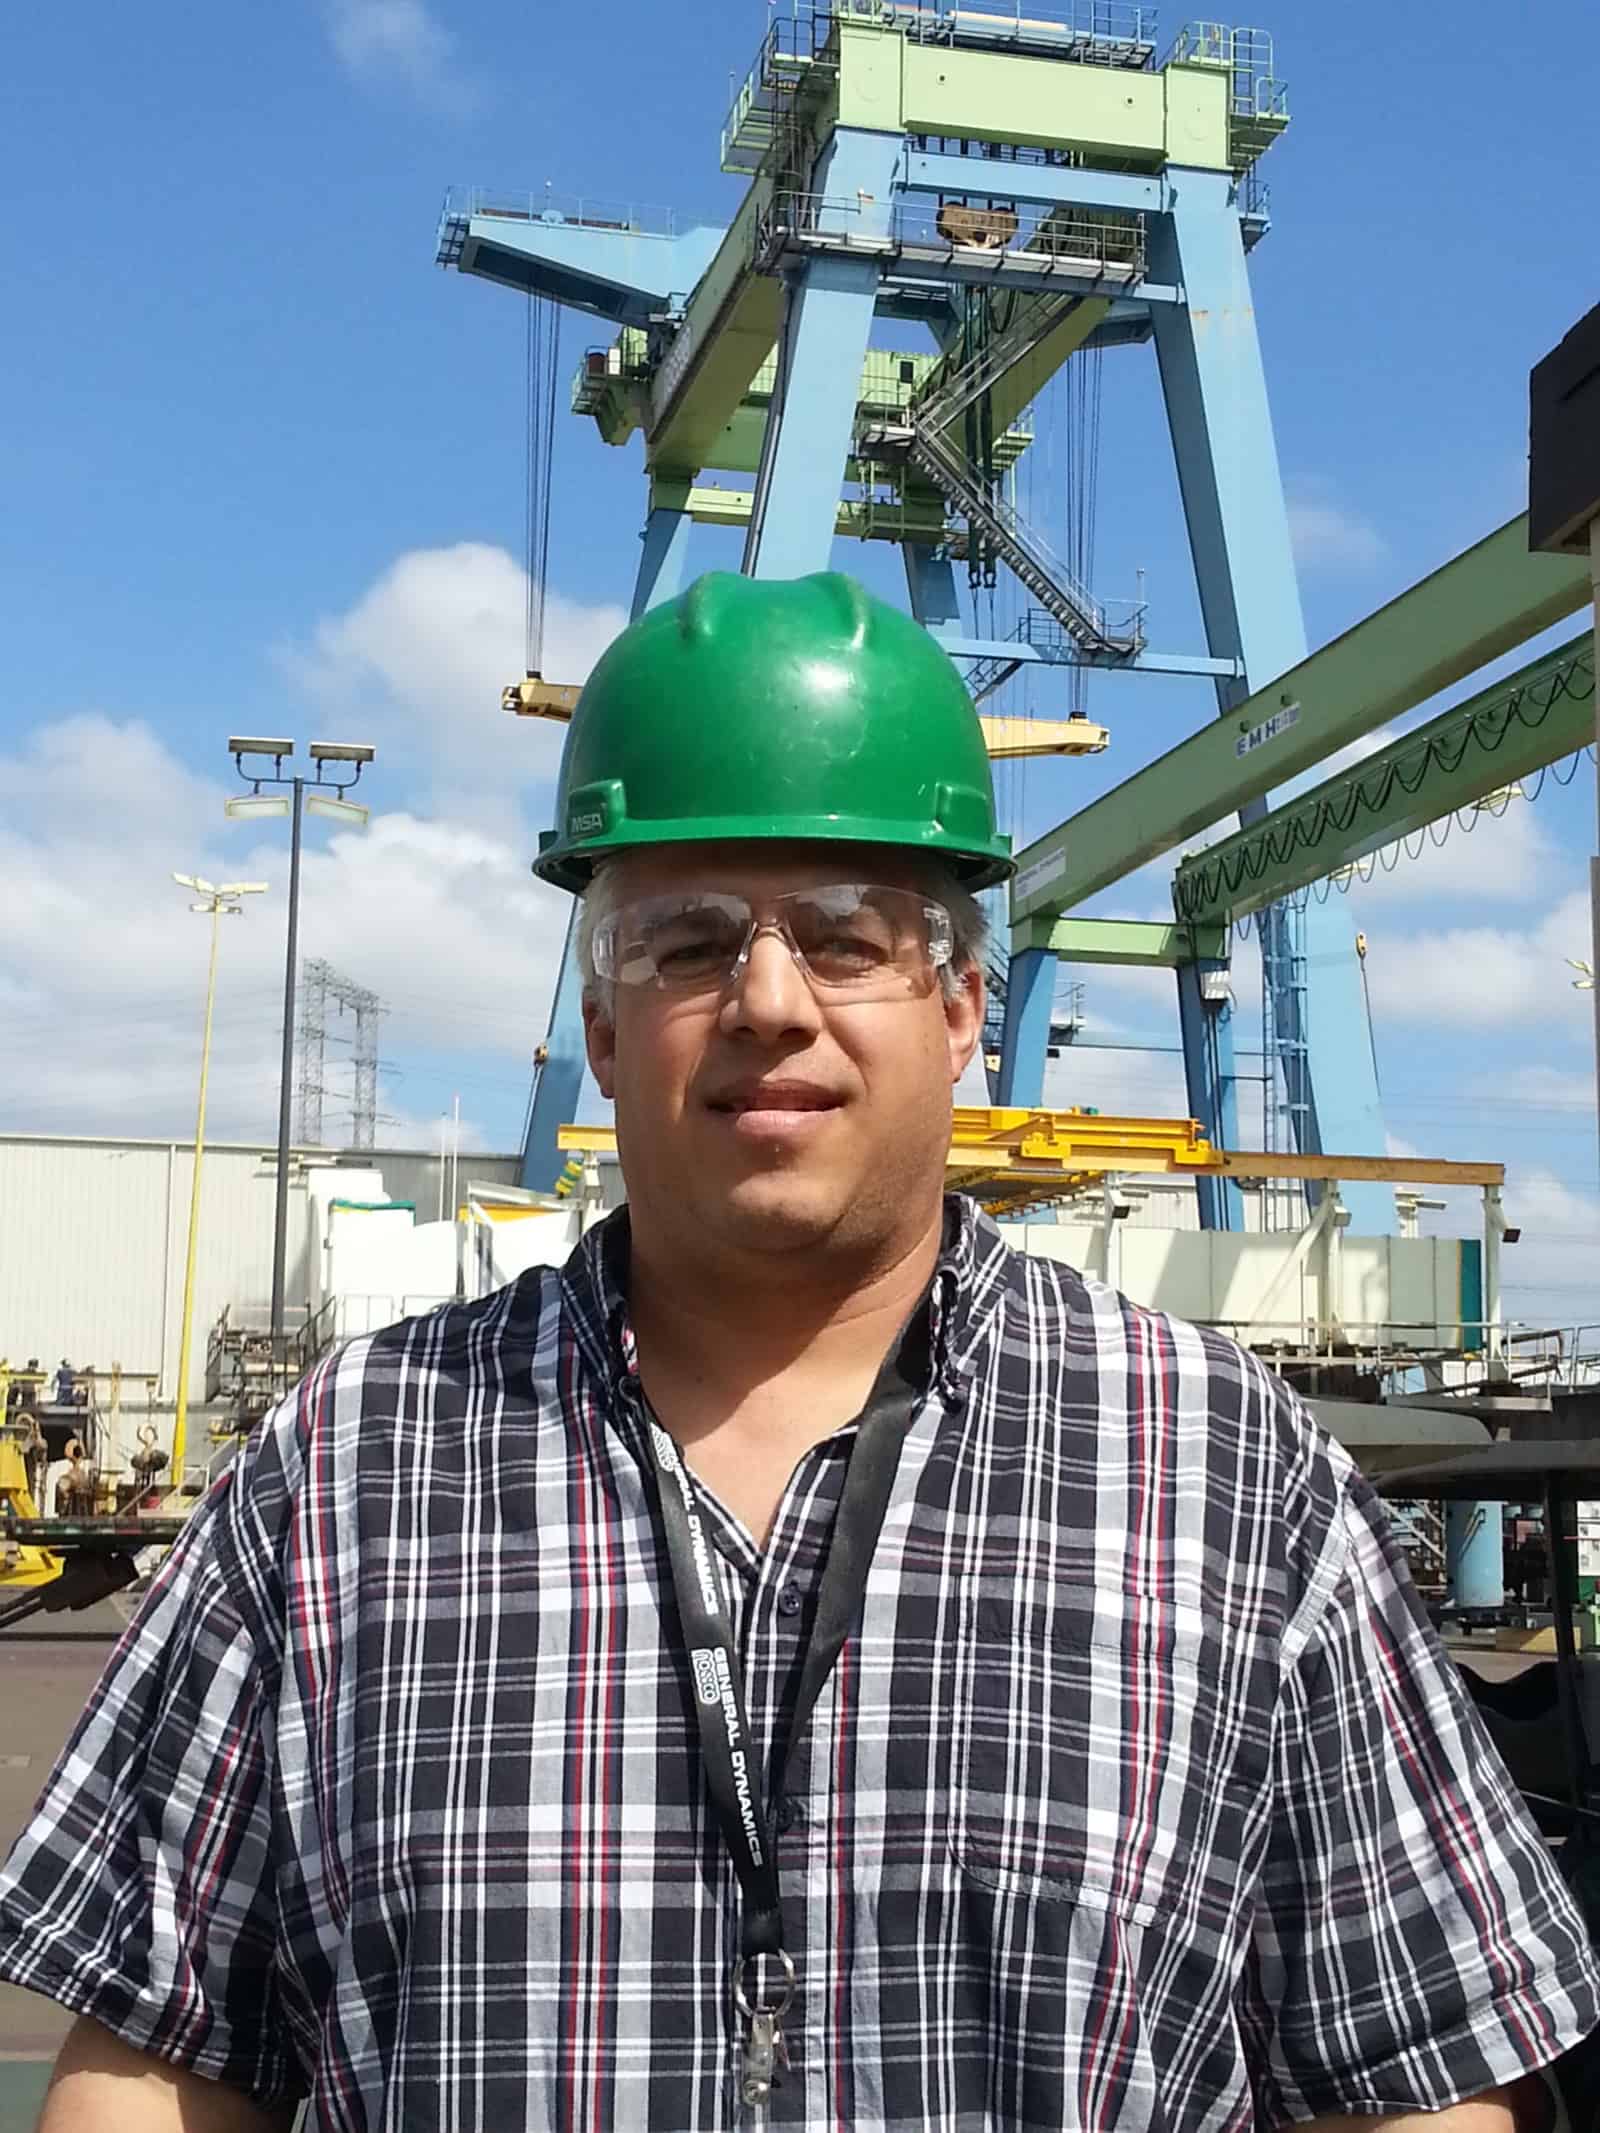 Tony Silva stands in front of a container crane wearing a hard hat